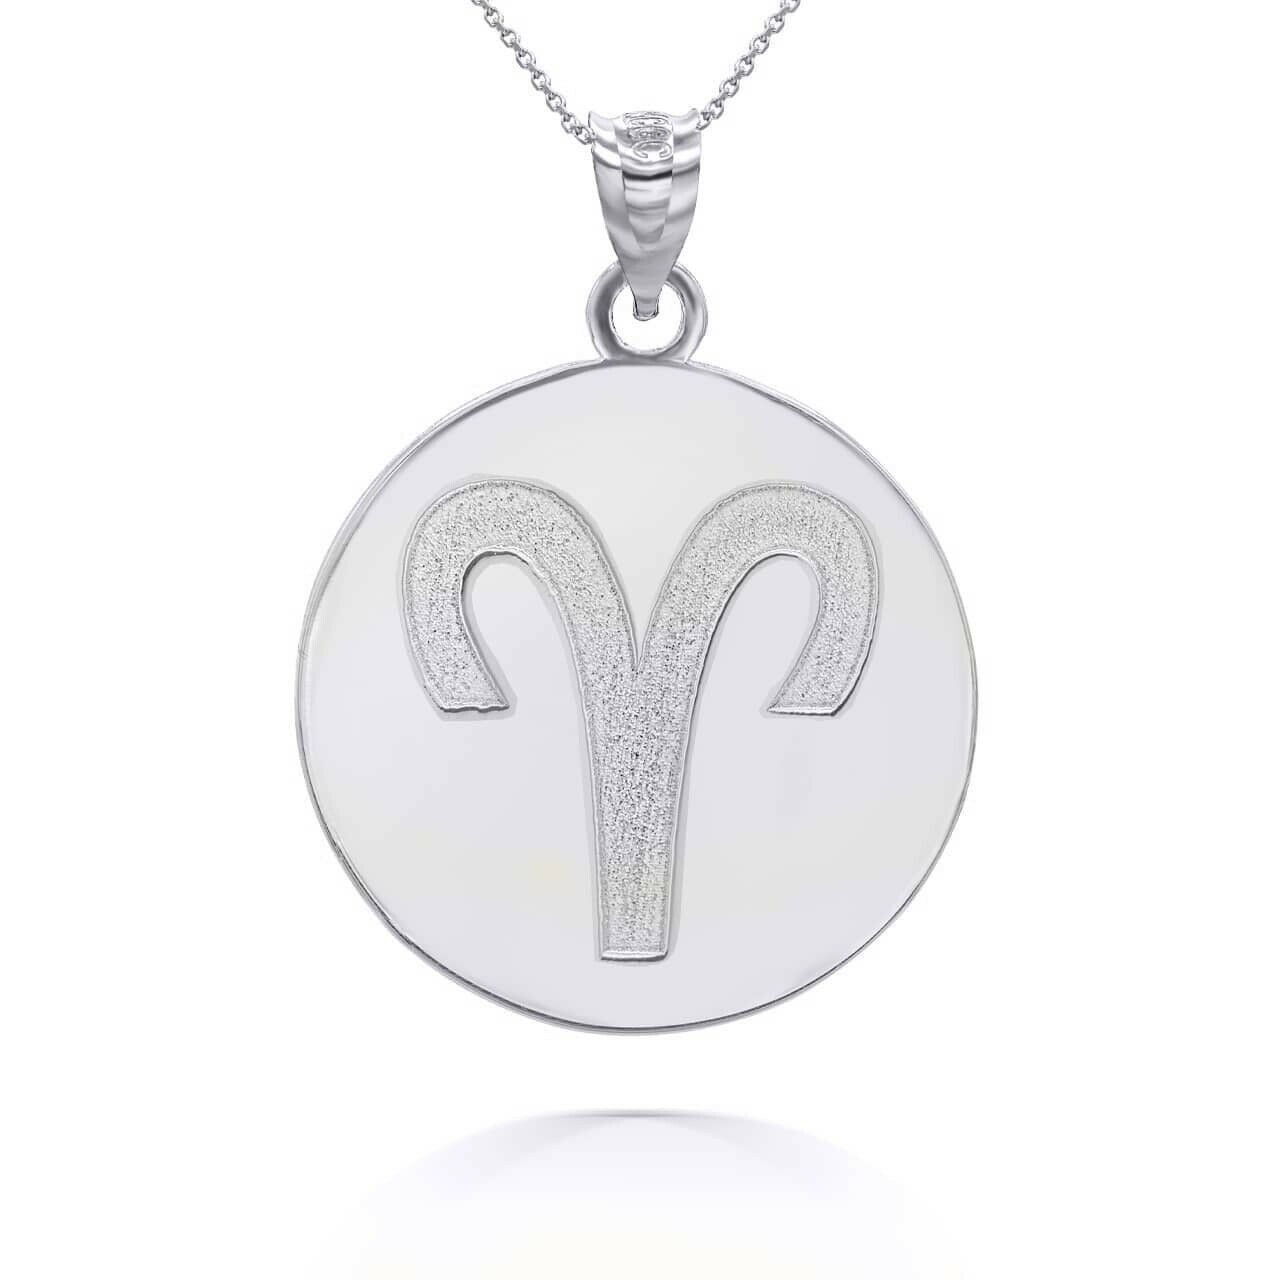 Personalized Engrave Name Zodiac Sign Aries Round Silver Pendant Necklace